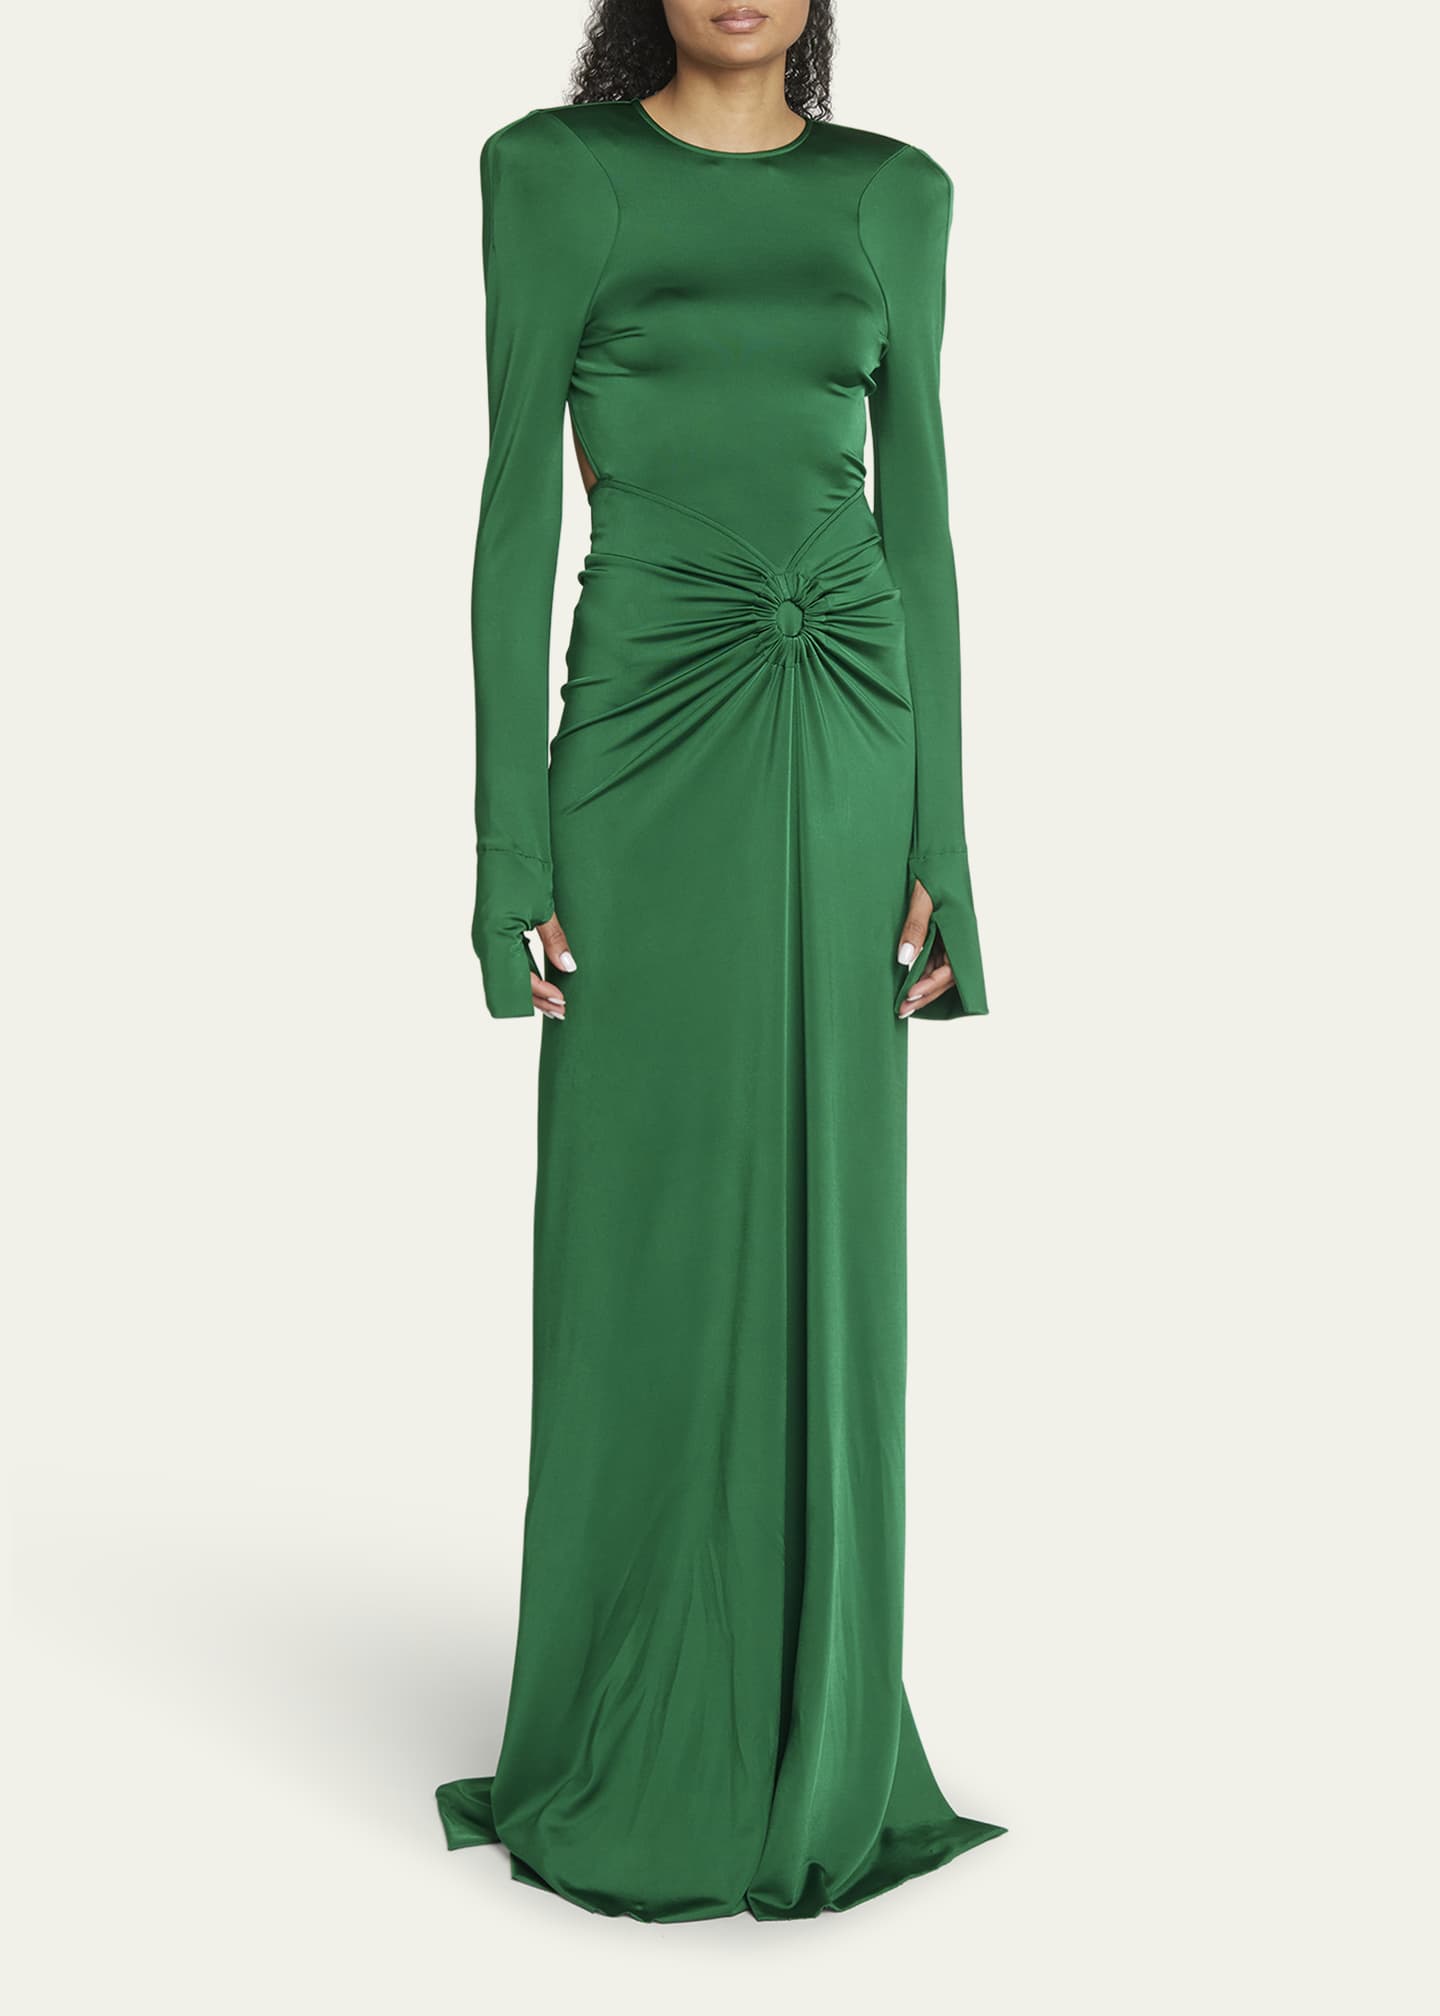 Victoria Beckham Open Back Gown with Gathered Circle Detail - Bergdorf ...